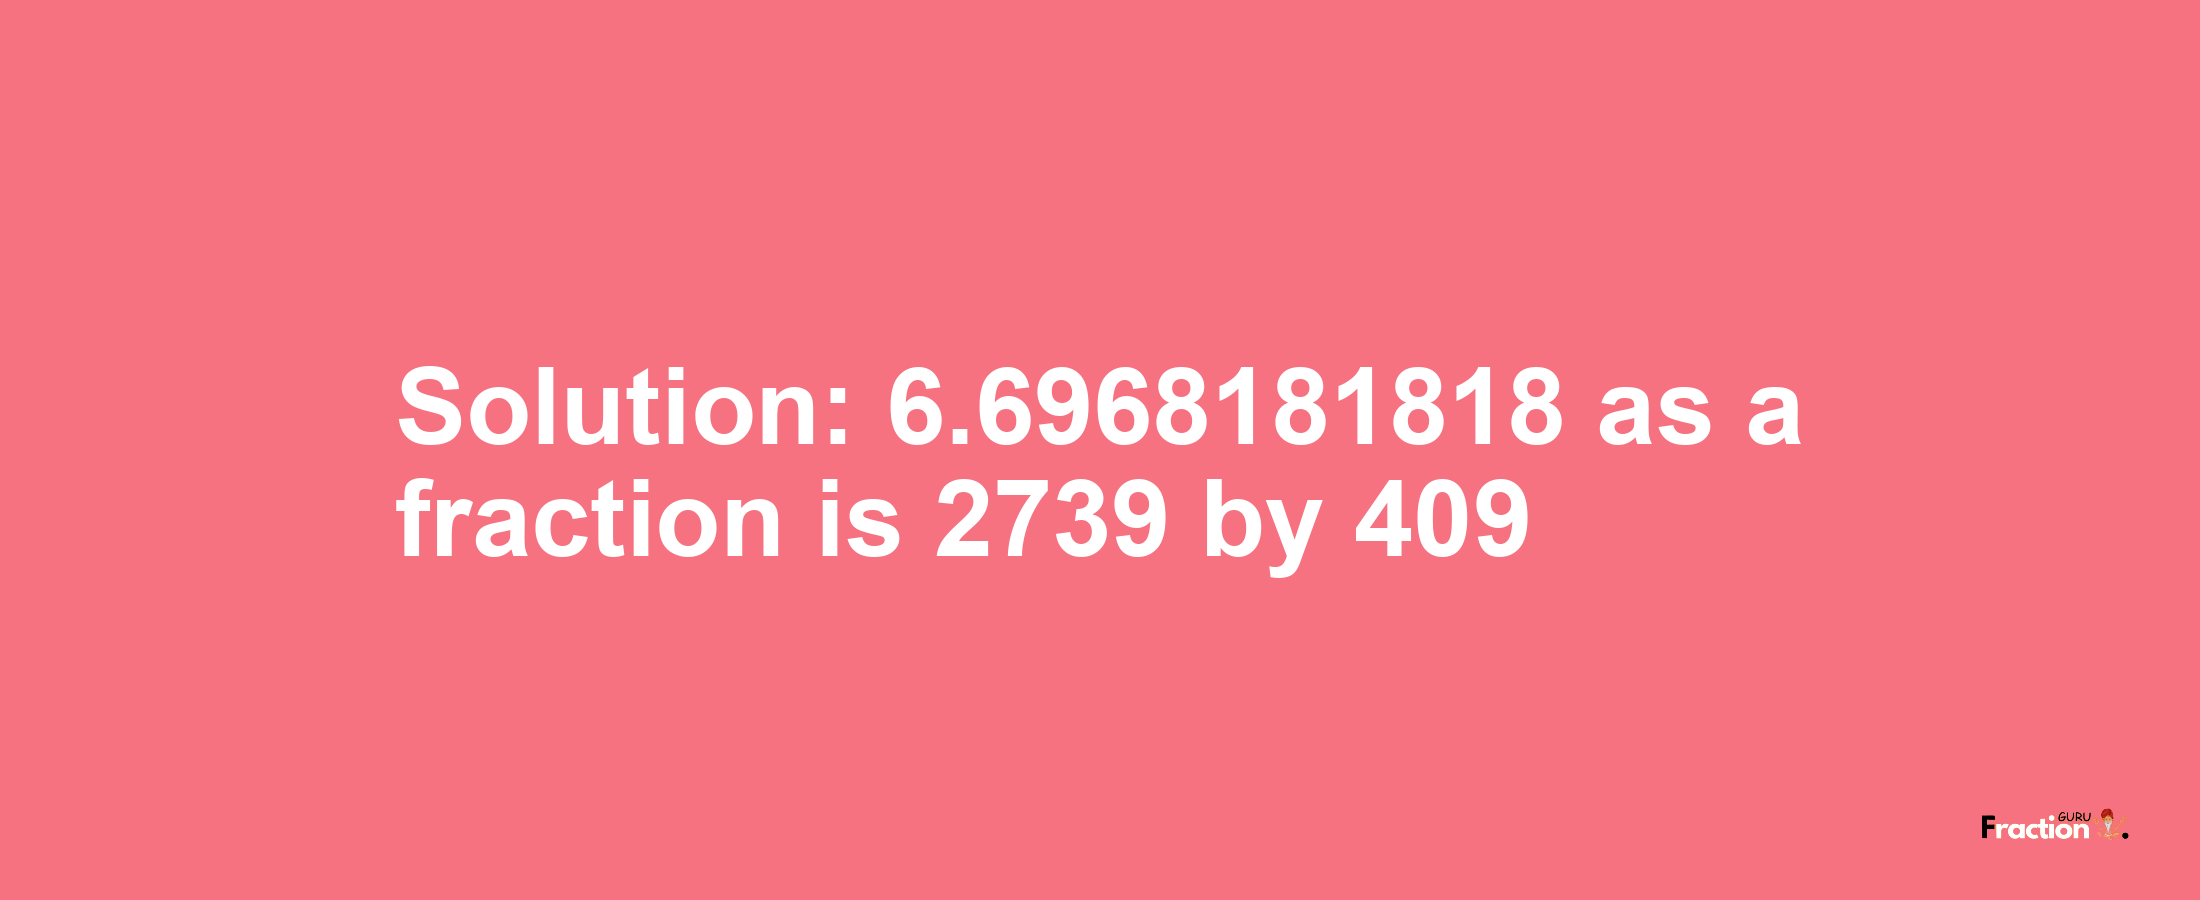 Solution:6.6968181818 as a fraction is 2739/409